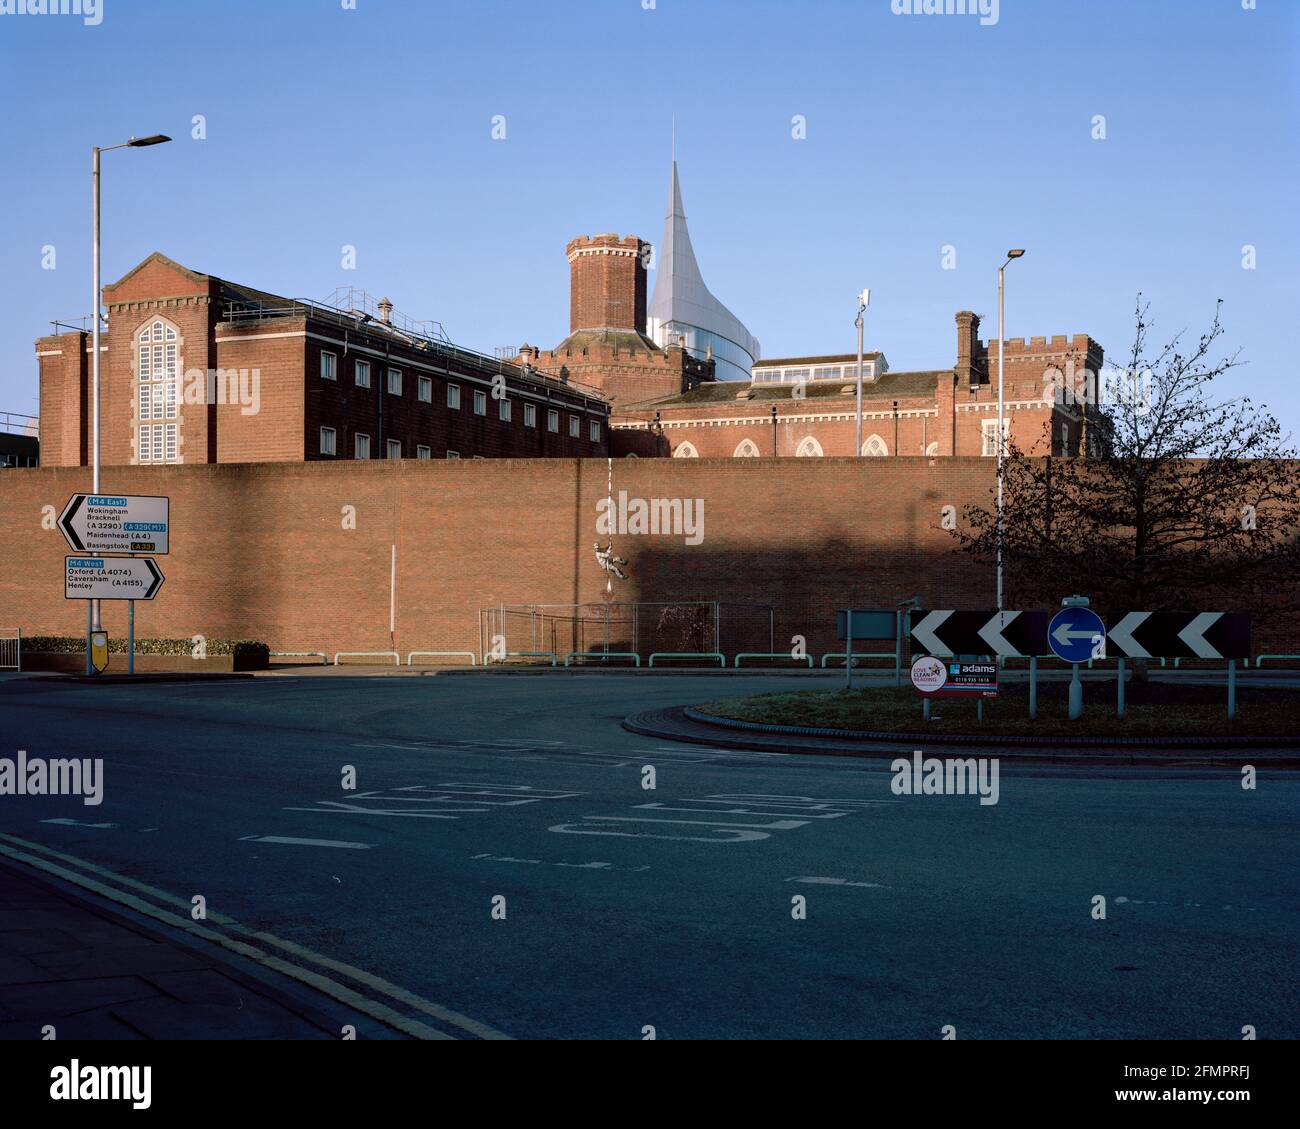 Copyright John Angerson 2021 Street artist Banksy has confirmed he was behind the artwork that appeared on the wall of Reading Prison, Berkshire, UK. Stock Photo